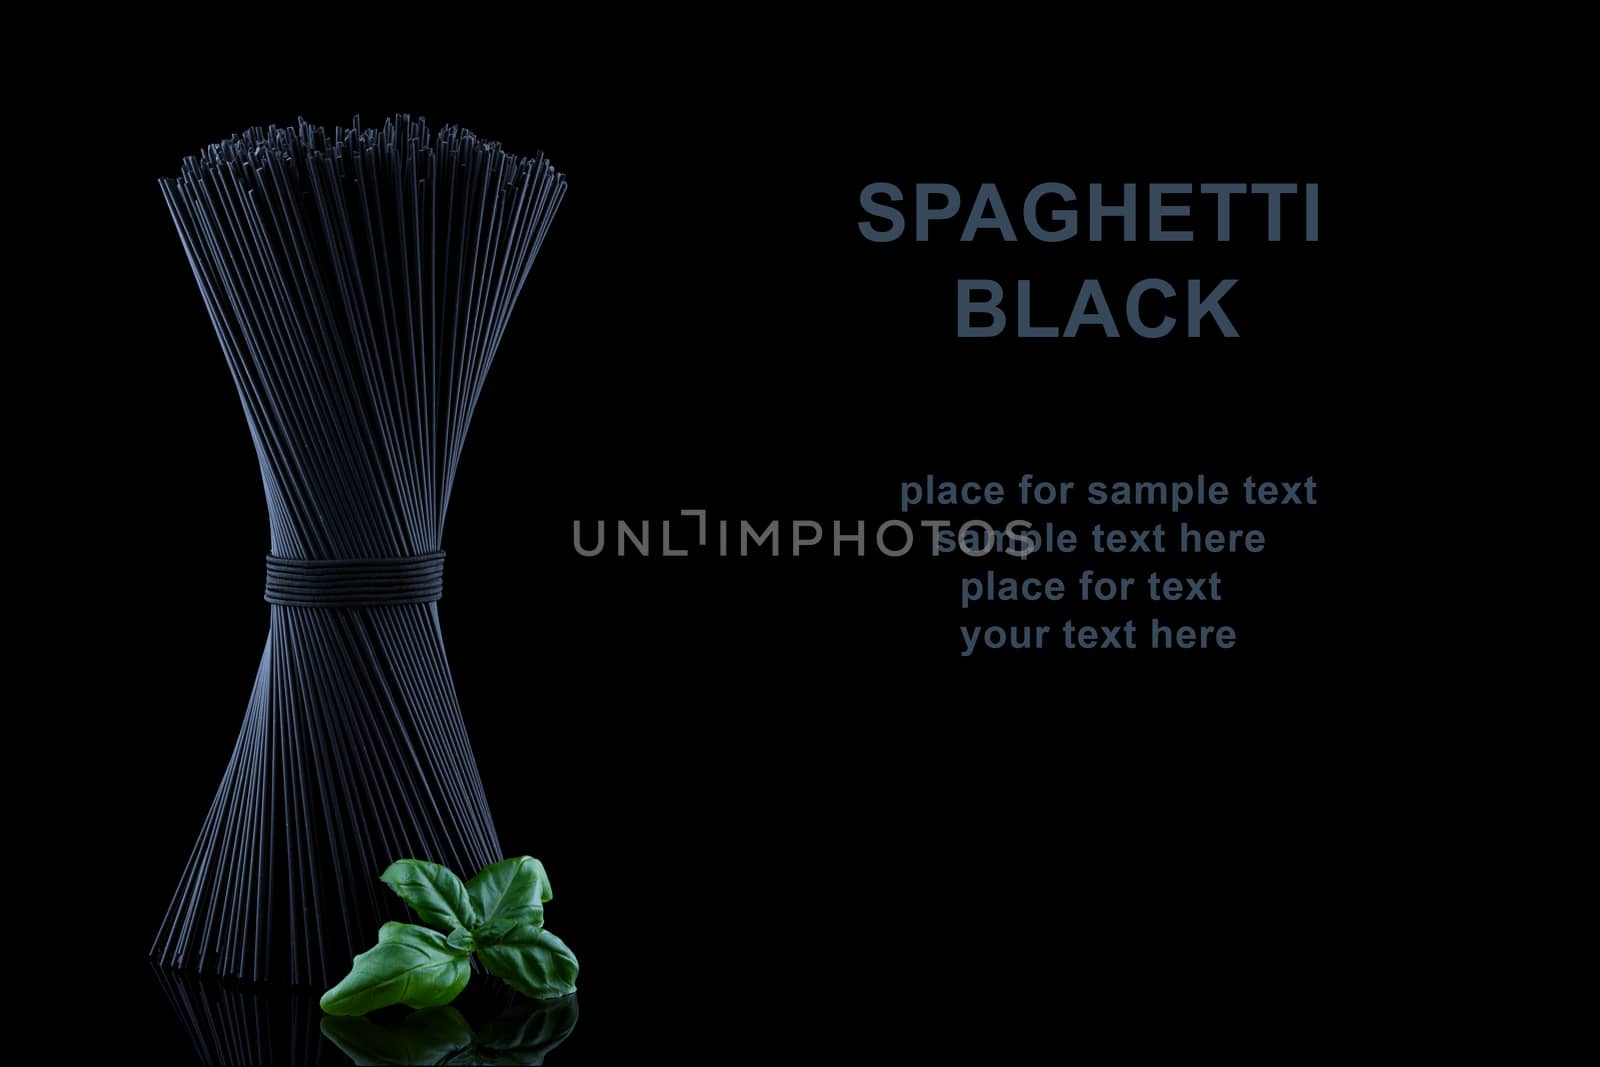 Black spaghetti with basel leaves on black background and place for text by Fischeron